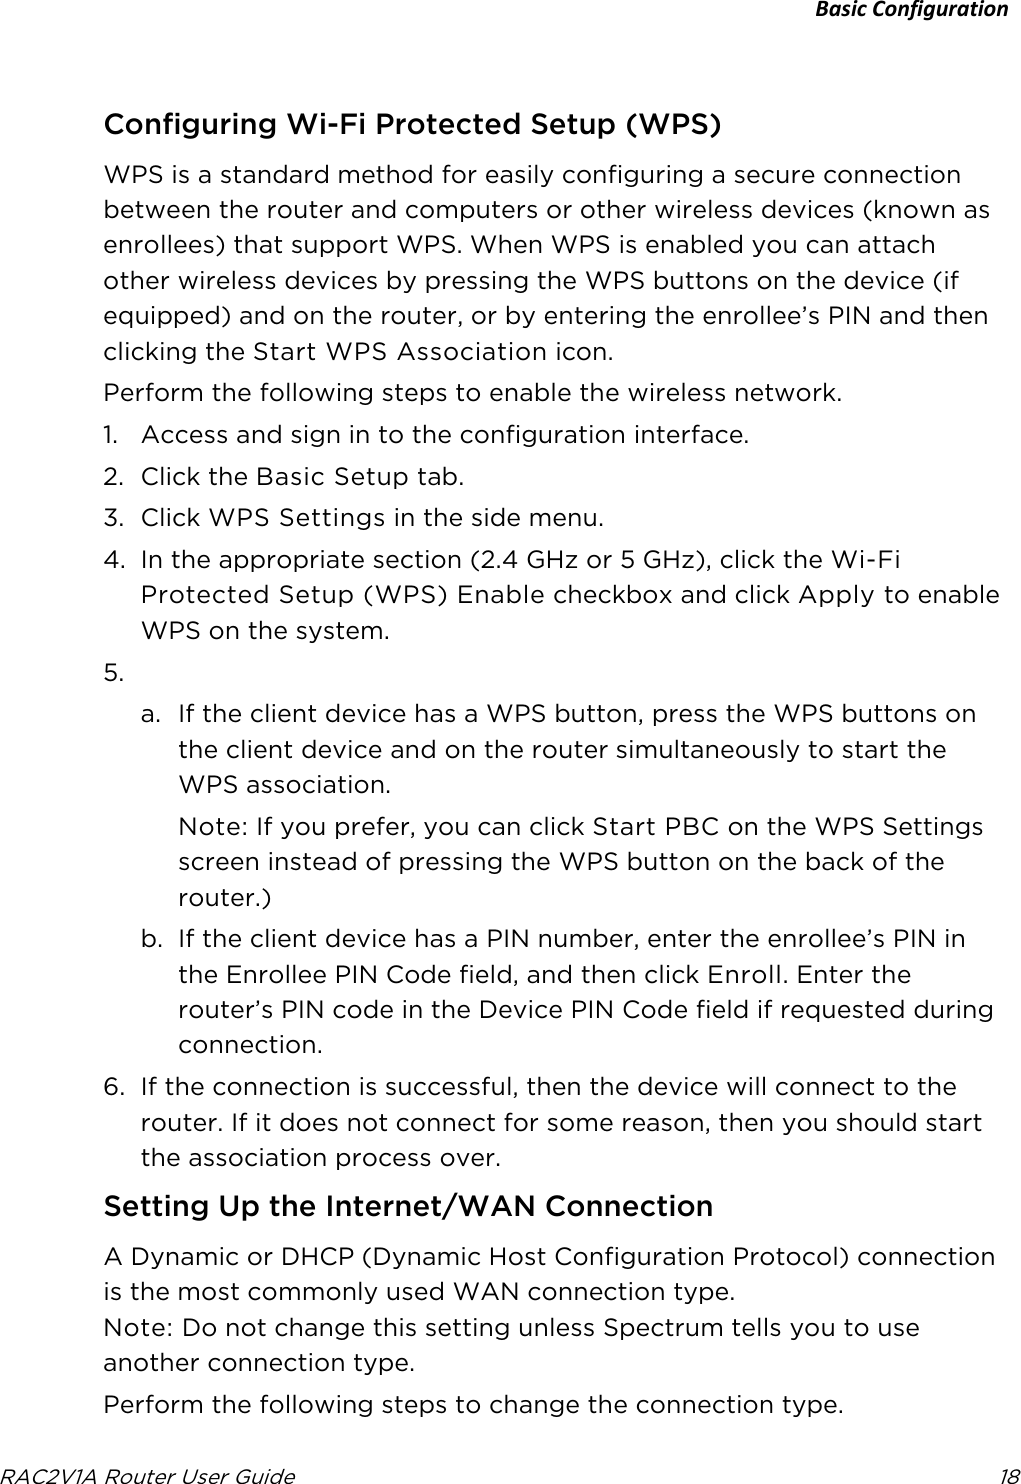 Basic Configuration  RAC2V1A Router User Guide 18     Configuring Wi-Fi Protected Setup (WPS) WPS is a standard method for easily configuring a secure connection between the router and computers or other wireless devices (known as enrollees) that support WPS. When WPS is enabled you can attach other wireless devices by pressing the WPS buttons on the device (if equipped) and on the router, or by entering the enrollee’s PIN and then clicking the Start WPS Association icon. Perform the following steps to enable the wireless network. 1. Access and sign in to the configuration interface. 2. Click the Basic Setup tab. 3. Click WPS Settings in the side menu. 4. In the appropriate section (2.4 GHz or 5 GHz), click the Wi-Fi Protected Setup (WPS) Enable checkbox and click Apply to enable WPS on the system. 5.  a. If the client device has a WPS button, press the WPS buttons on the client device and on the router simultaneously to start the WPS association.  Note: If you prefer, you can click Start PBC on the WPS Settings screen instead of pressing the WPS button on the back of the router.) b. If the client device has a PIN number, enter the enrollee’s PIN in the Enrollee PIN Code field, and then click Enroll. Enter the router’s PIN code in the Device PIN Code field if requested during connection. 6. If the connection is successful, then the device will connect to the router. If it does not connect for some reason, then you should start the association process over.   Setting Up the Internet/WAN Connection A Dynamic or DHCP (Dynamic Host Configuration Protocol) connection is the most commonly used WAN connection type.  Note: Do not change this setting unless Spectrum tells you to use another connection type. Perform the following steps to change the connection type. 